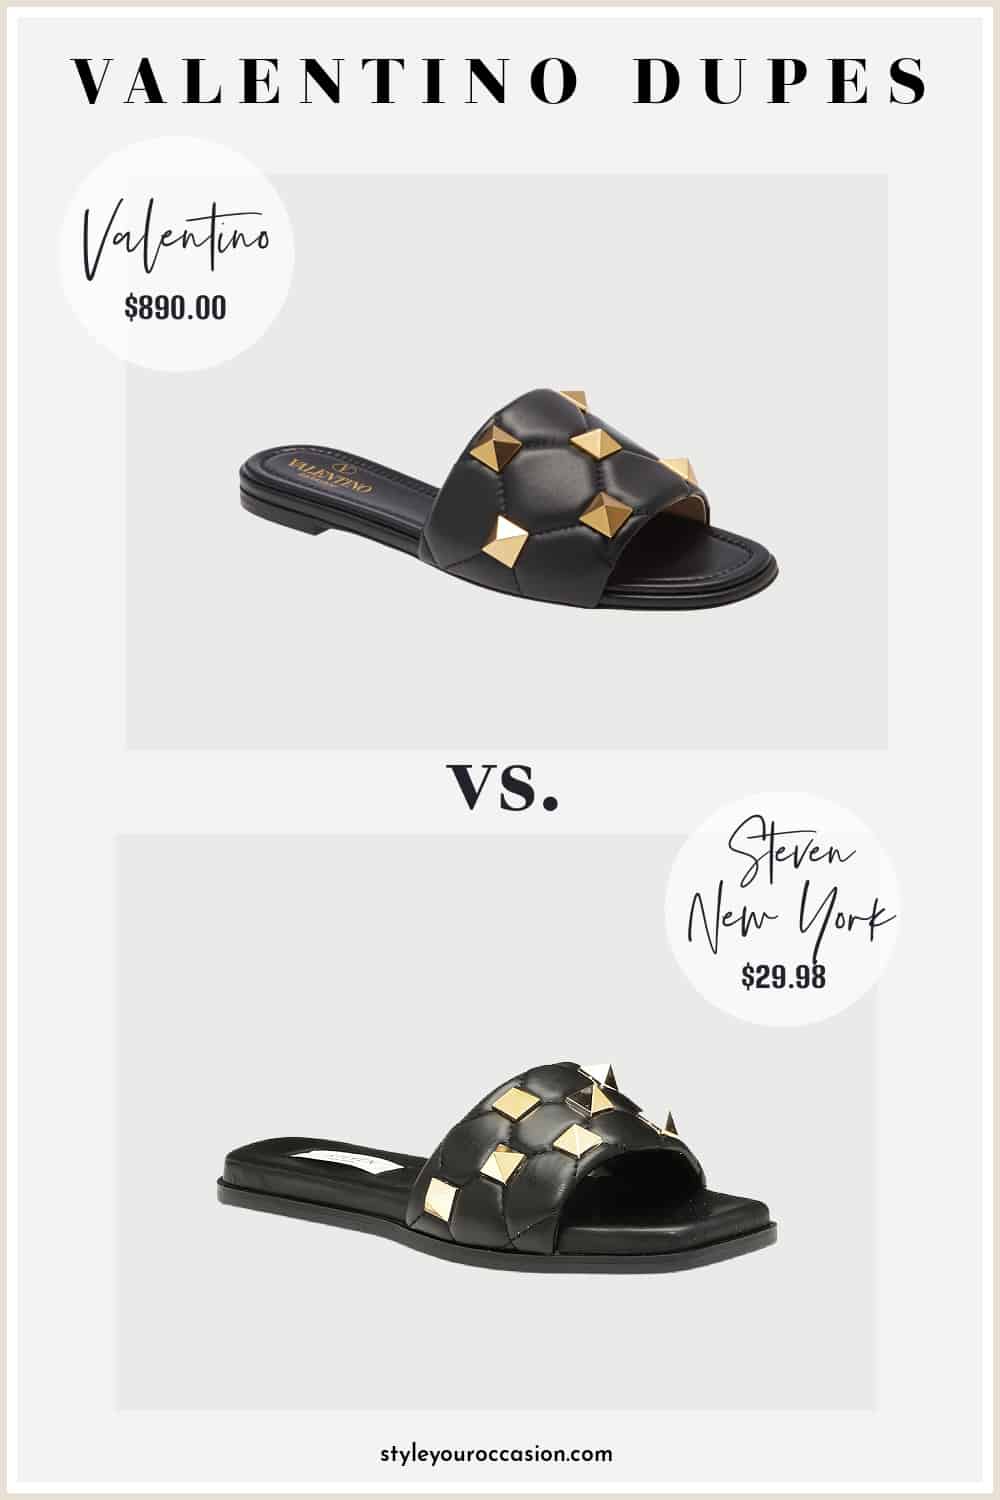 image of a black slide sandal with gold stud details and another sandal that is a look-alike